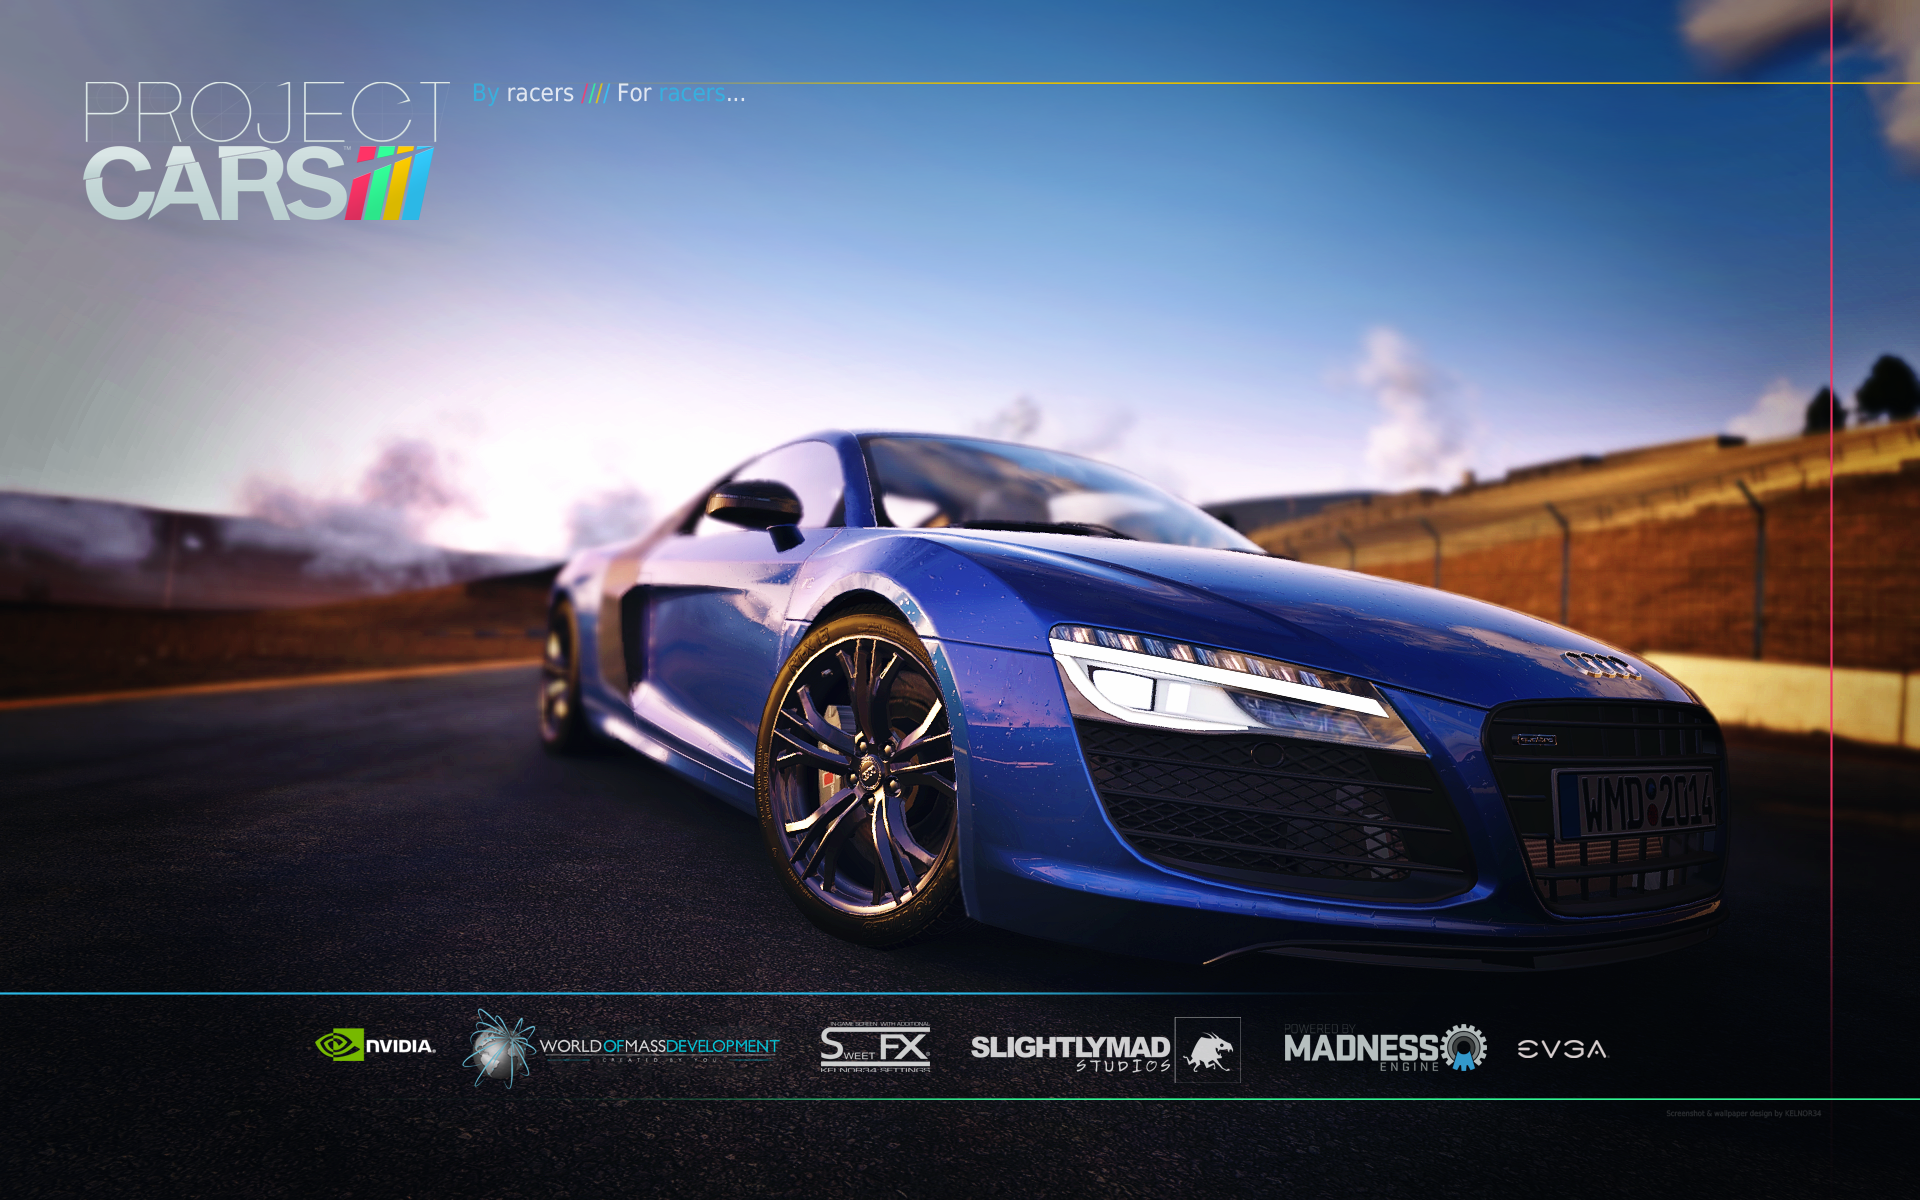 General 1920x1200 Audi R8 frontal view Project cars video games PC gaming Audi blue cars vehicle car